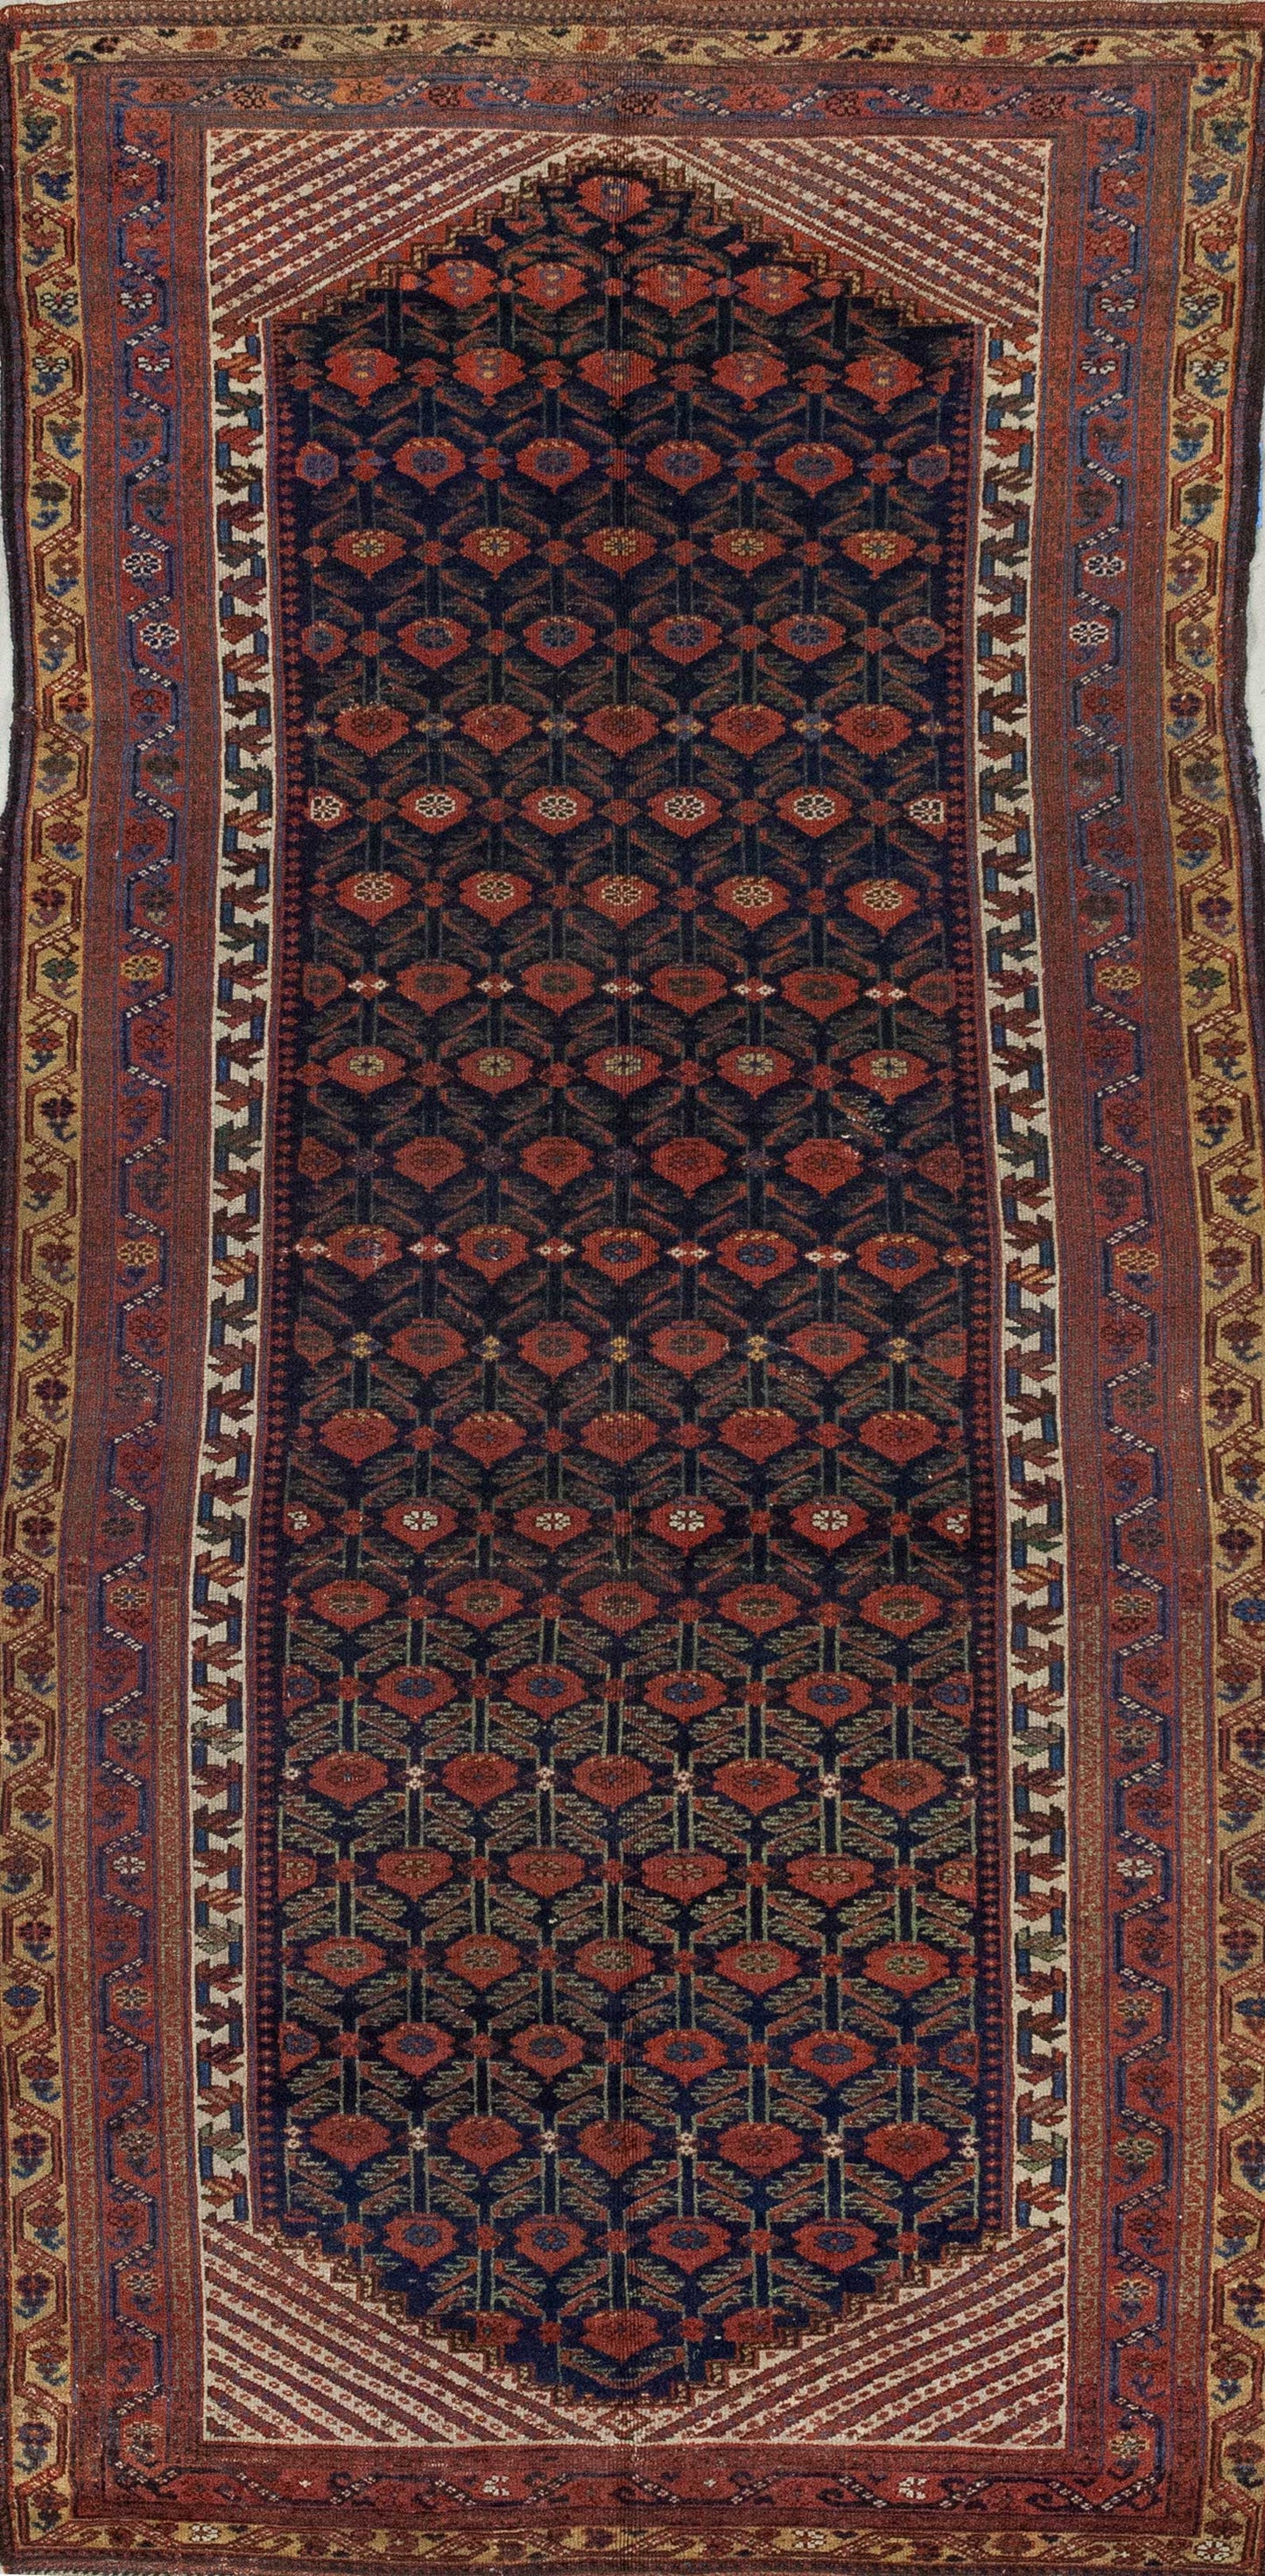 Runner rug with several frames in the antique style.